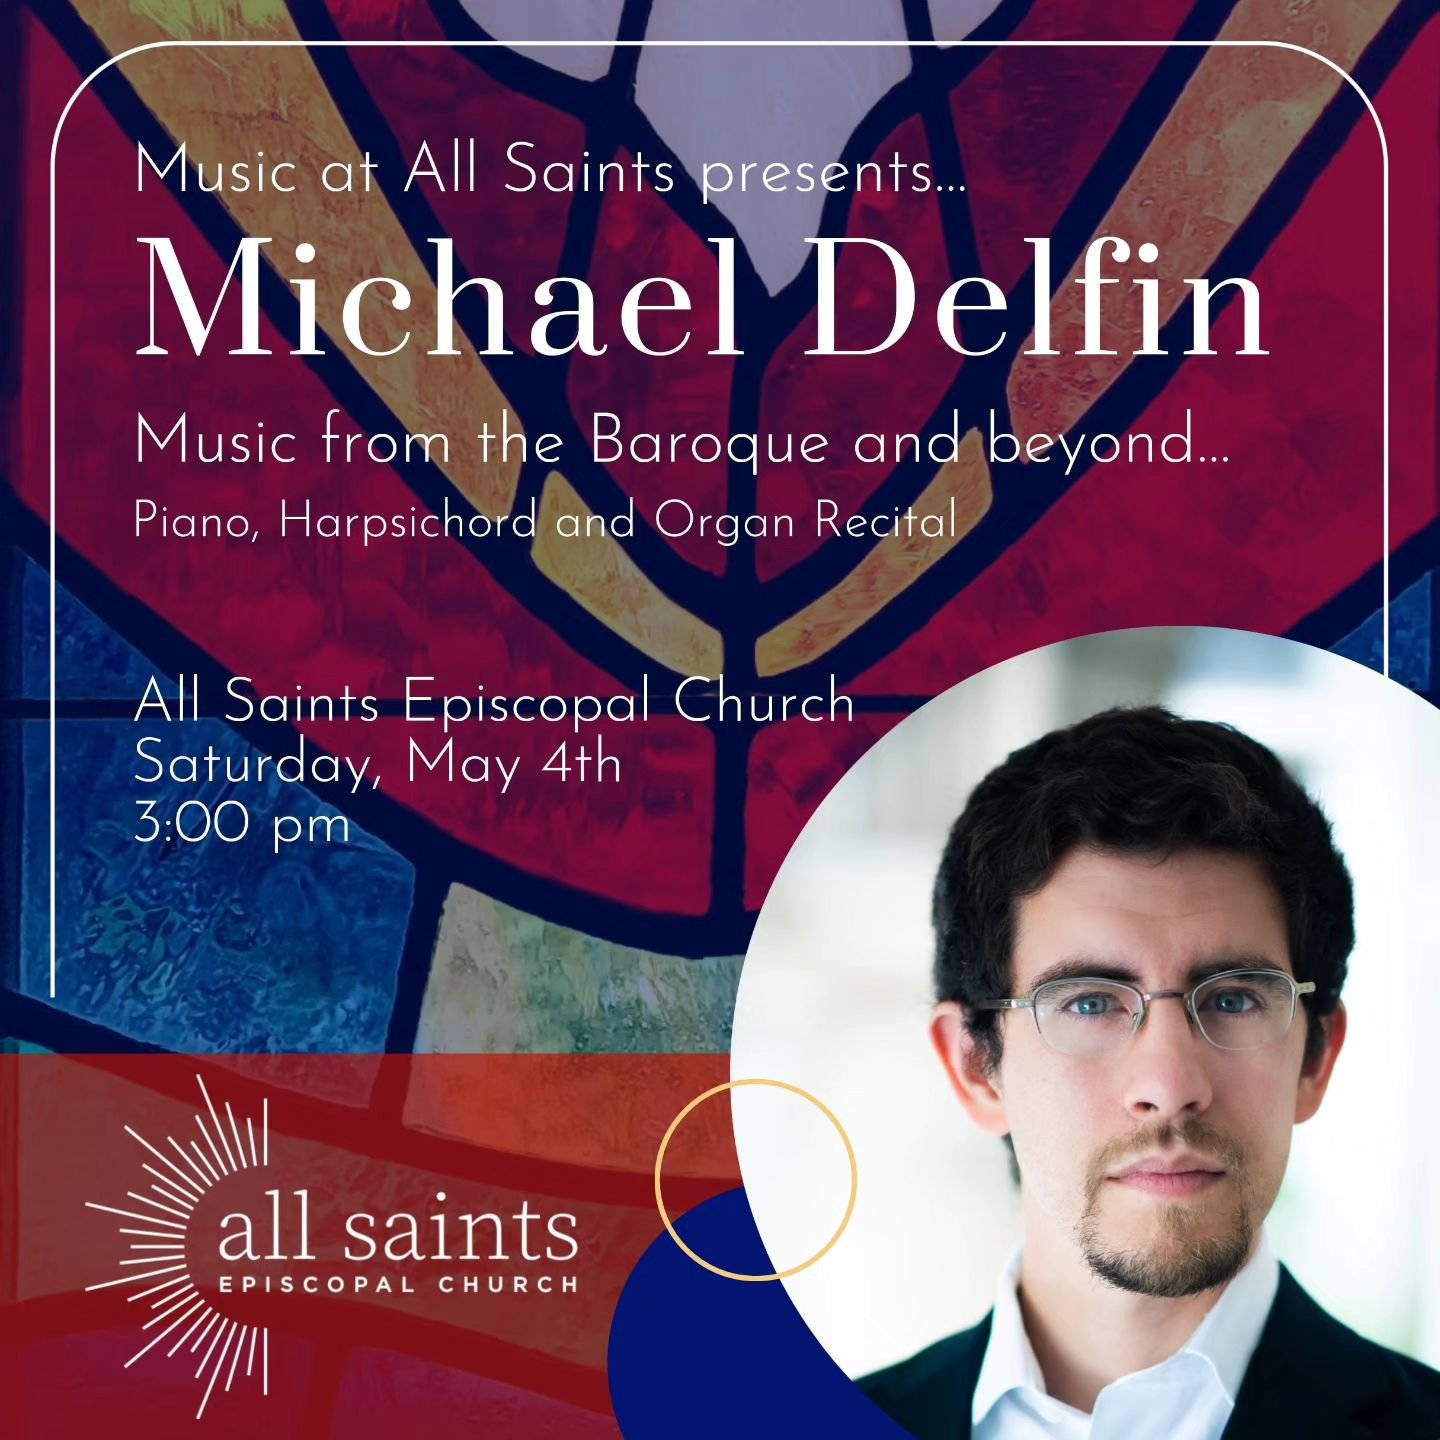 Join us for an afternoon of great music with Dr. Michael Delfin on Saturday, May 4th at 3:00 pm at All Saints!

Praised for &ldquo;beautiful performances of great warmth&rdquo; (Classical Voice of North Carolina), Michael Delf&iacute;n captures the l